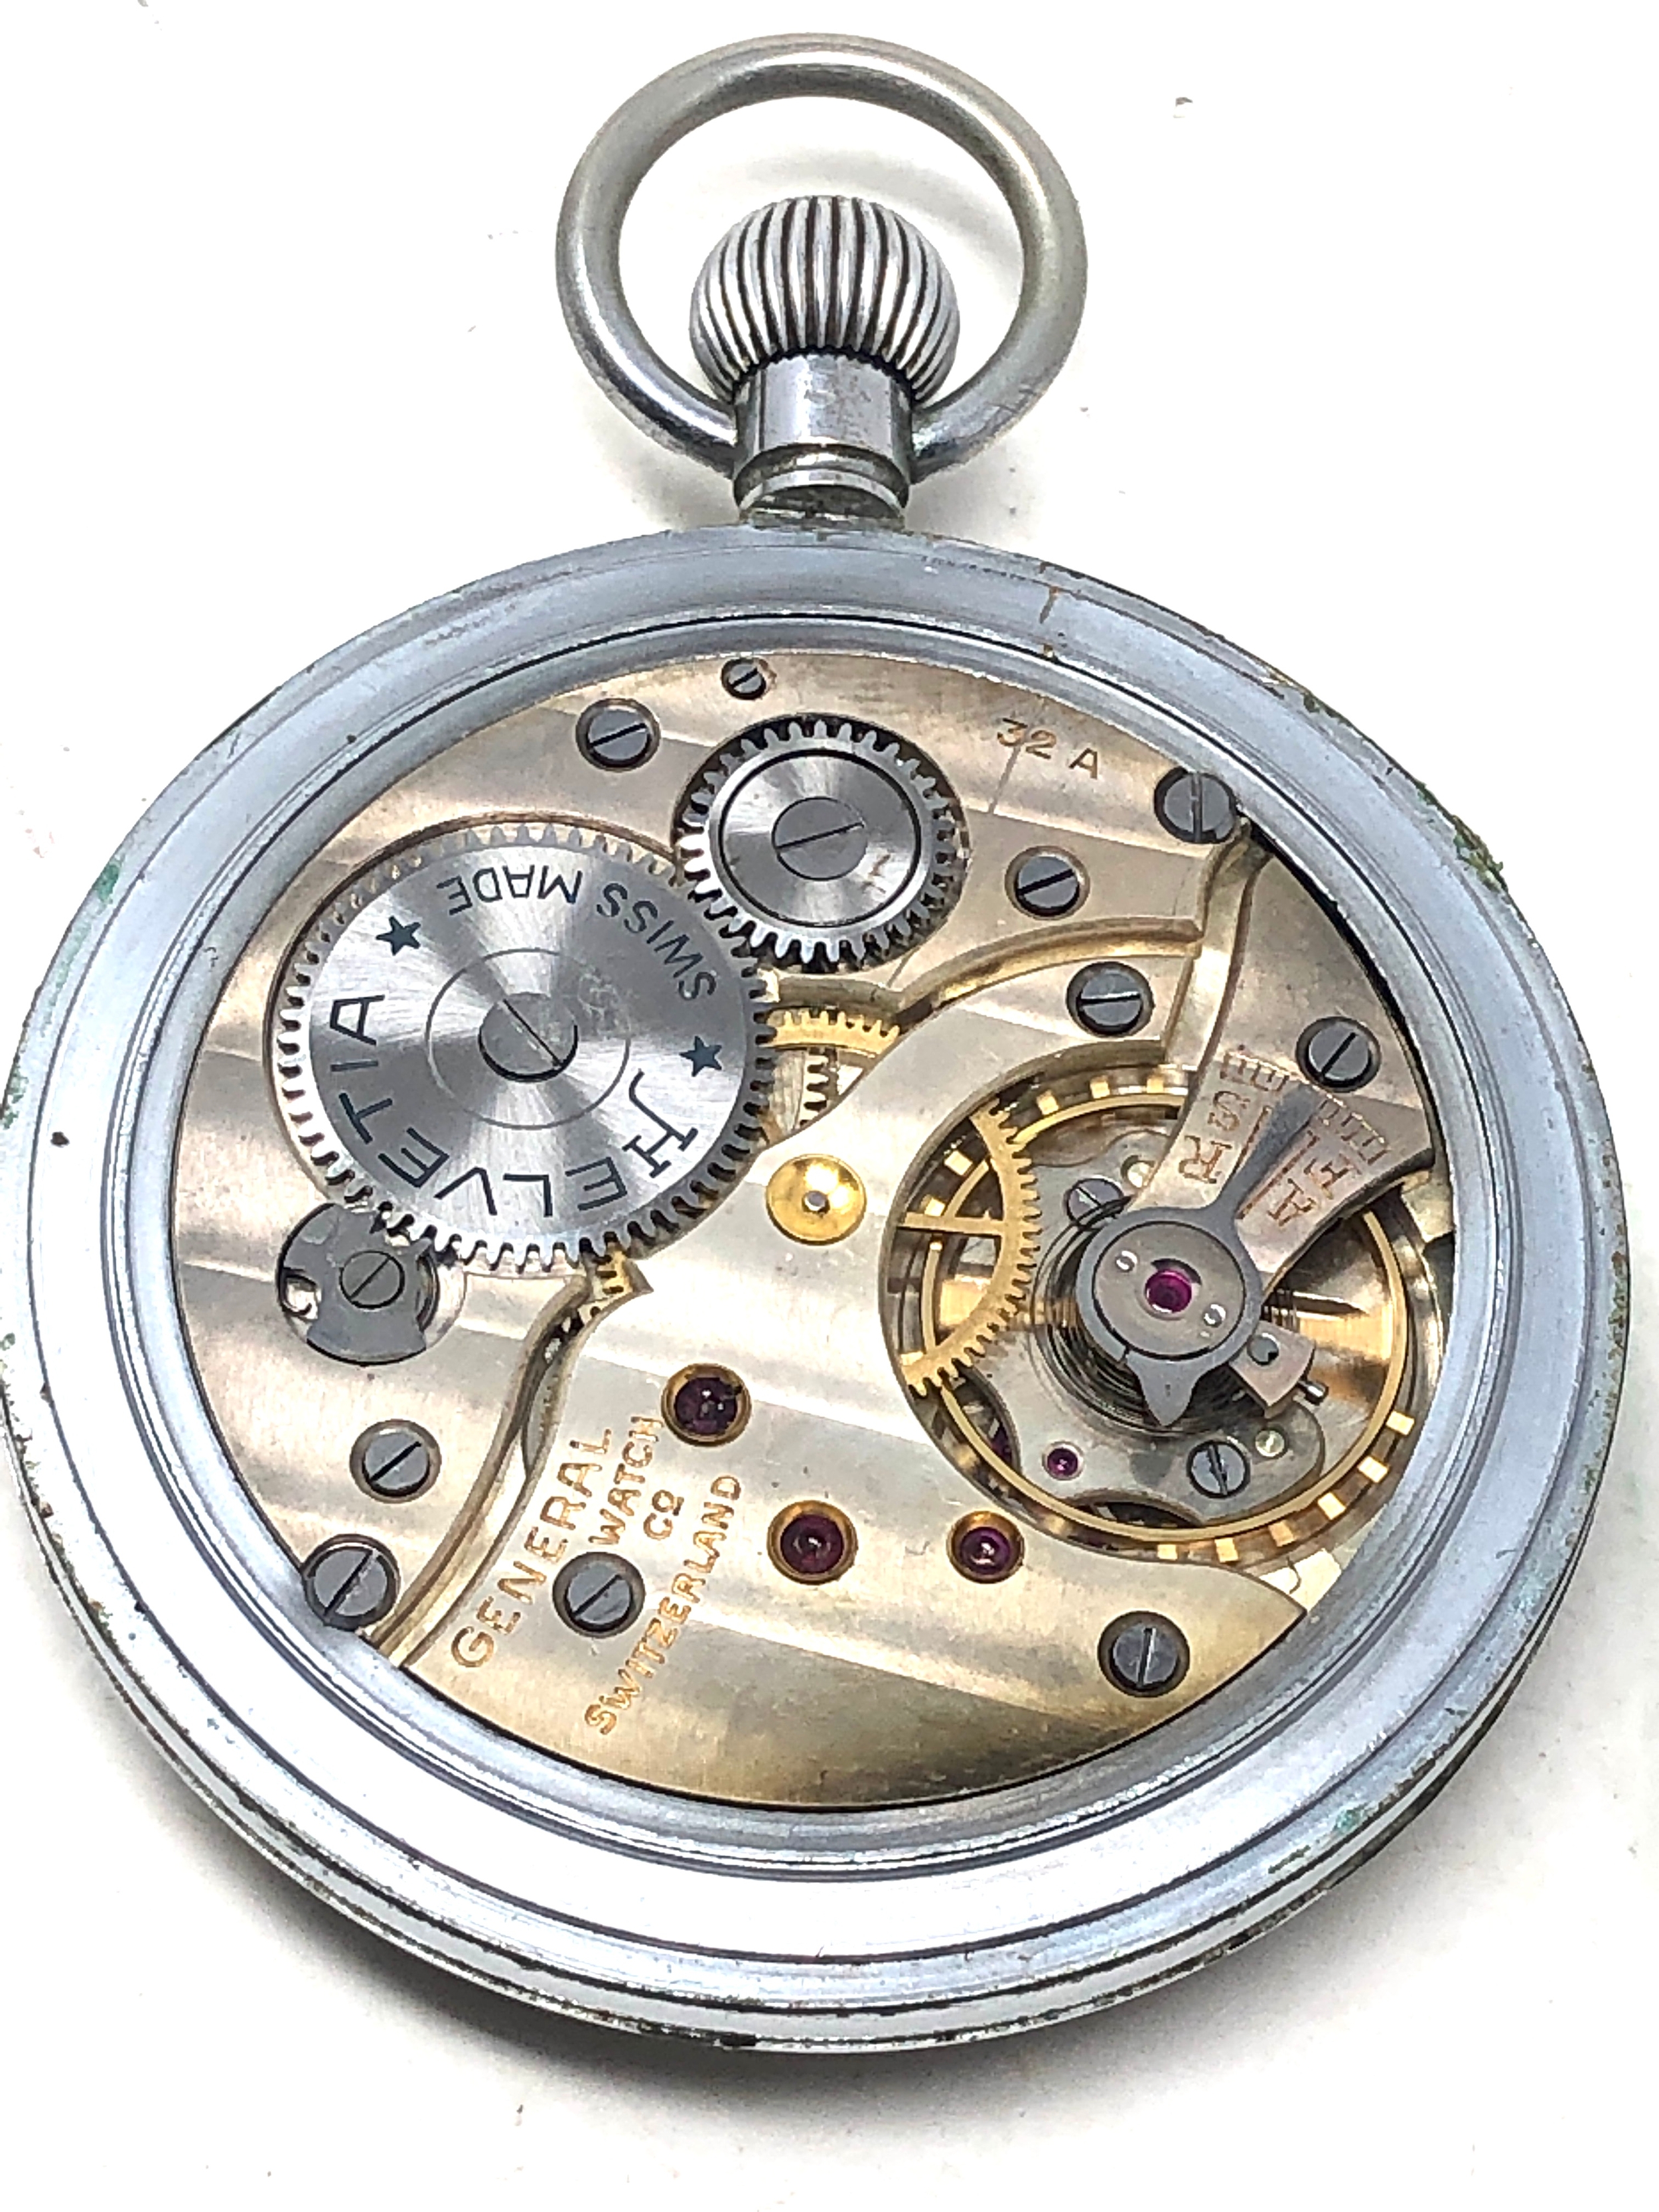 military ww2 pocket watch Helvetia the watch is ticking - Image 3 of 3